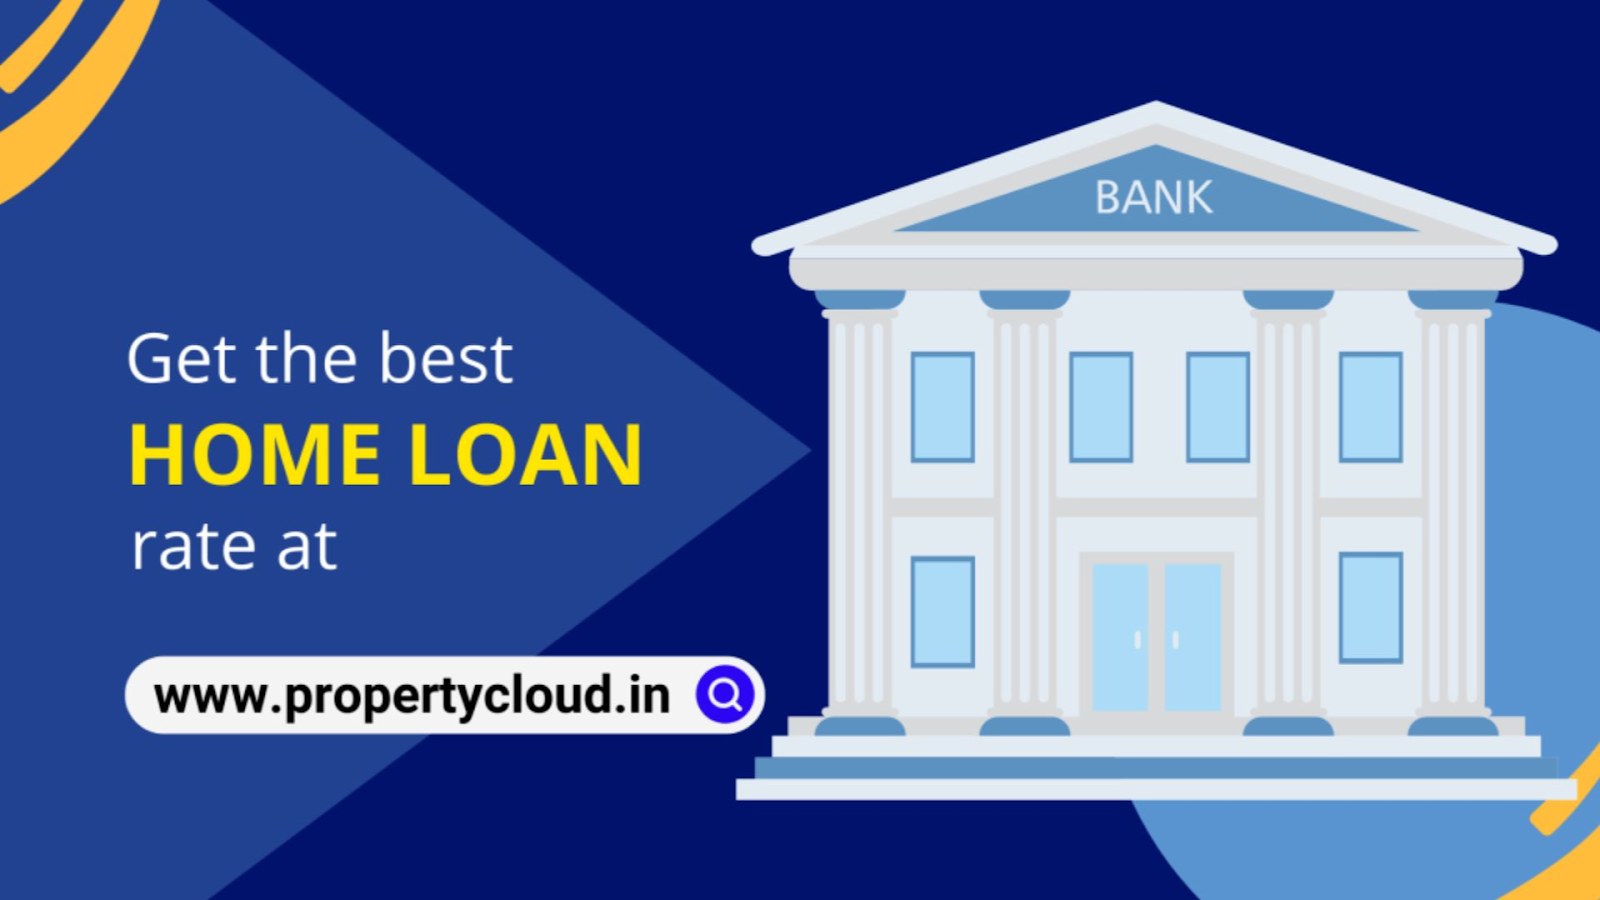 Contact PropertyCloud, and get a home loan at the best interest rates.